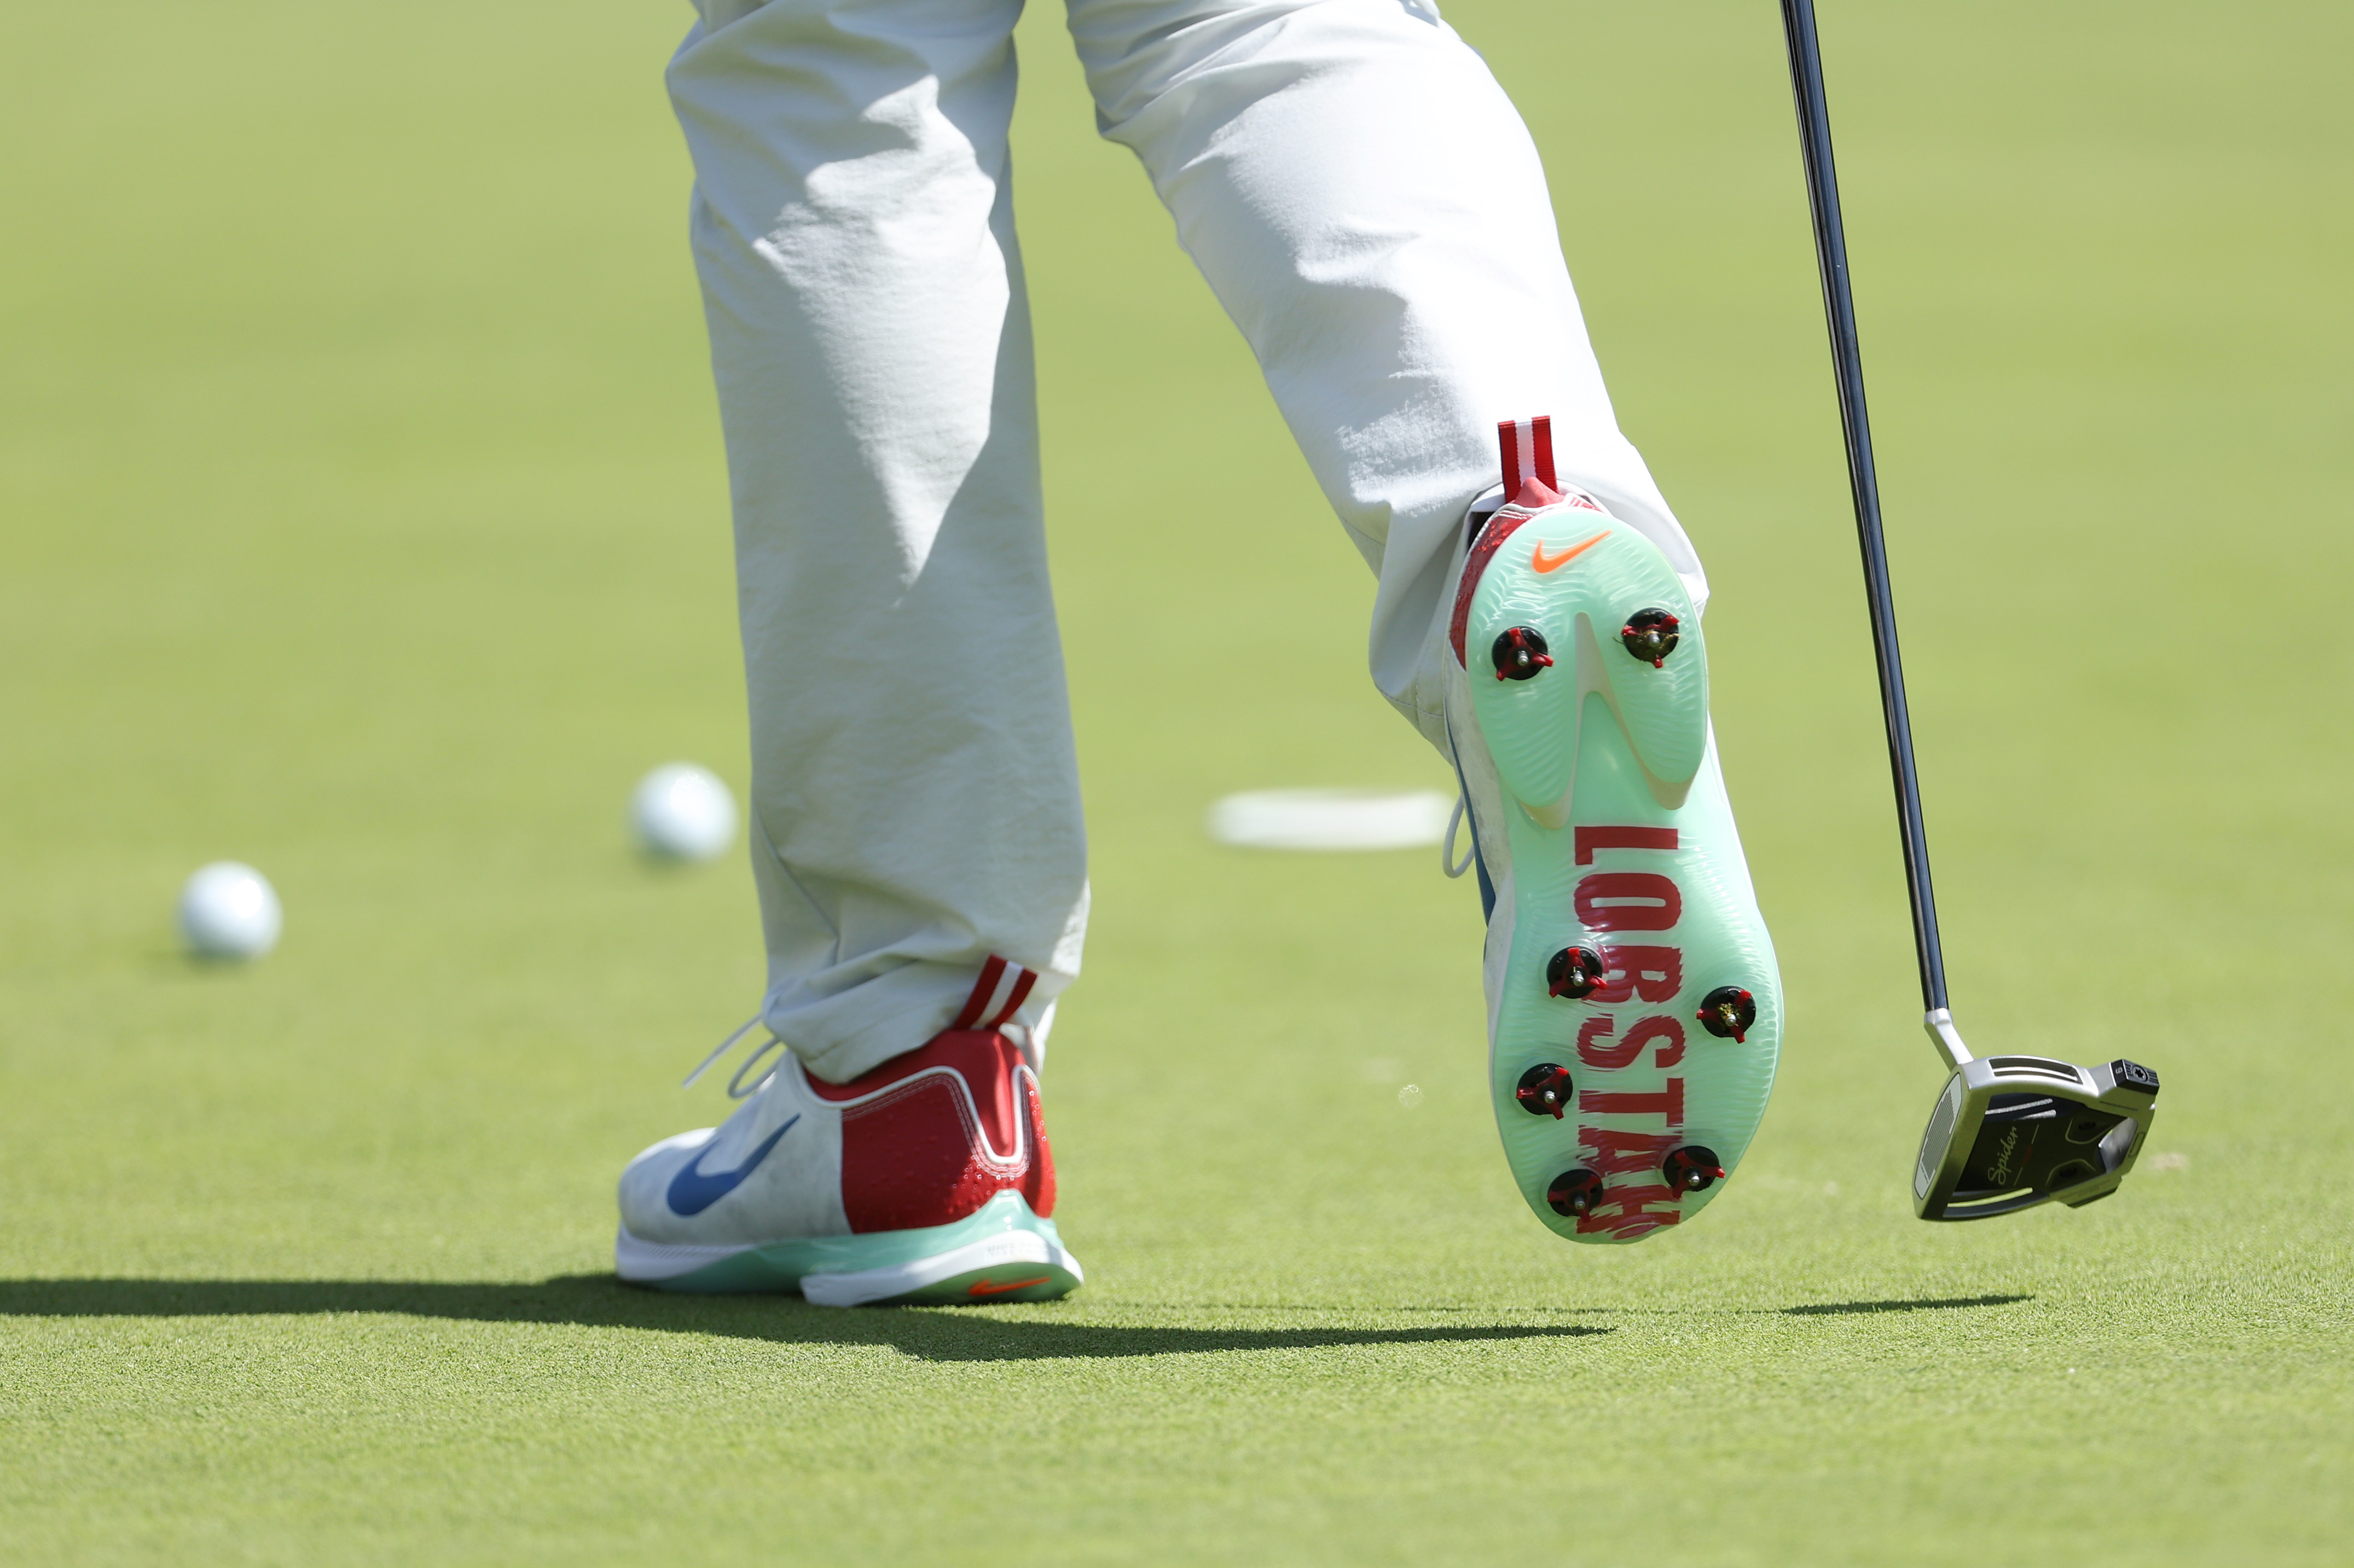 Nike's “Lobstah” golf shoes are making a splash at the U.S. Open